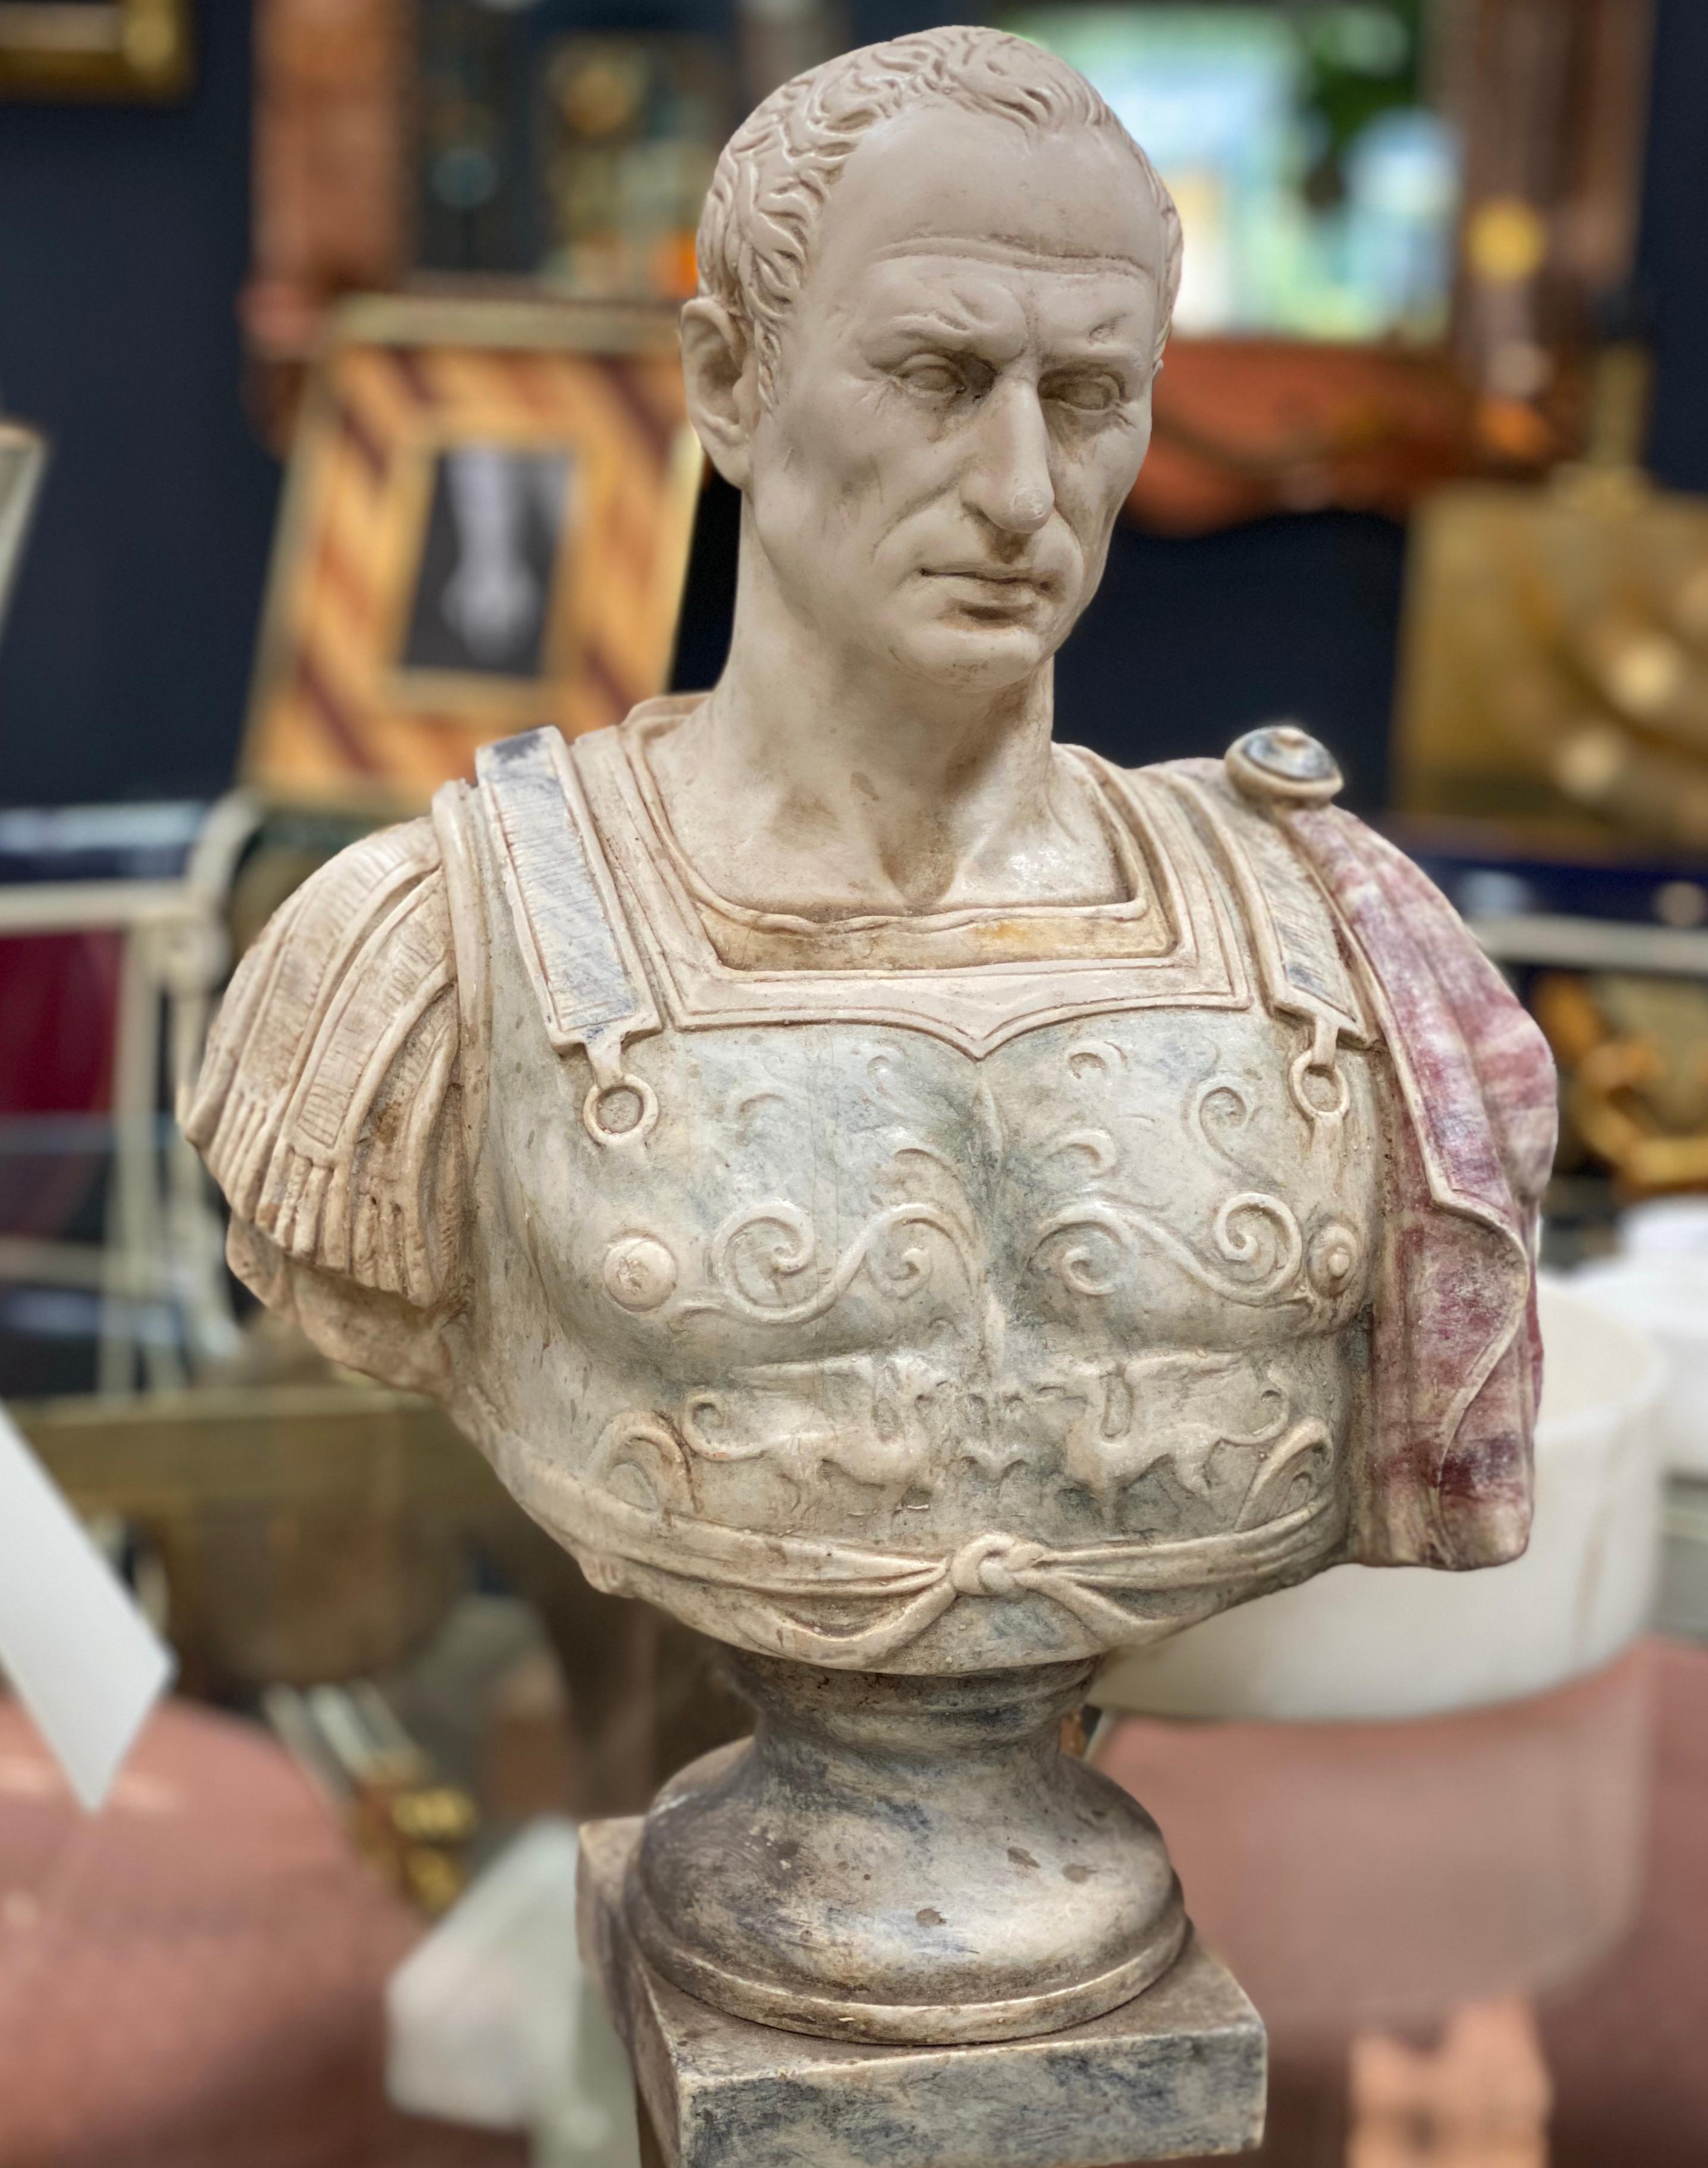 Julius Caesar bust sculpture, the Emperor made with marble dust.
A fine large library bust of Julius Caesar, probably the most famous of all Roman emperors.

Gaius Julius Caesar was a Roman general and statesman and a distinguished writer of